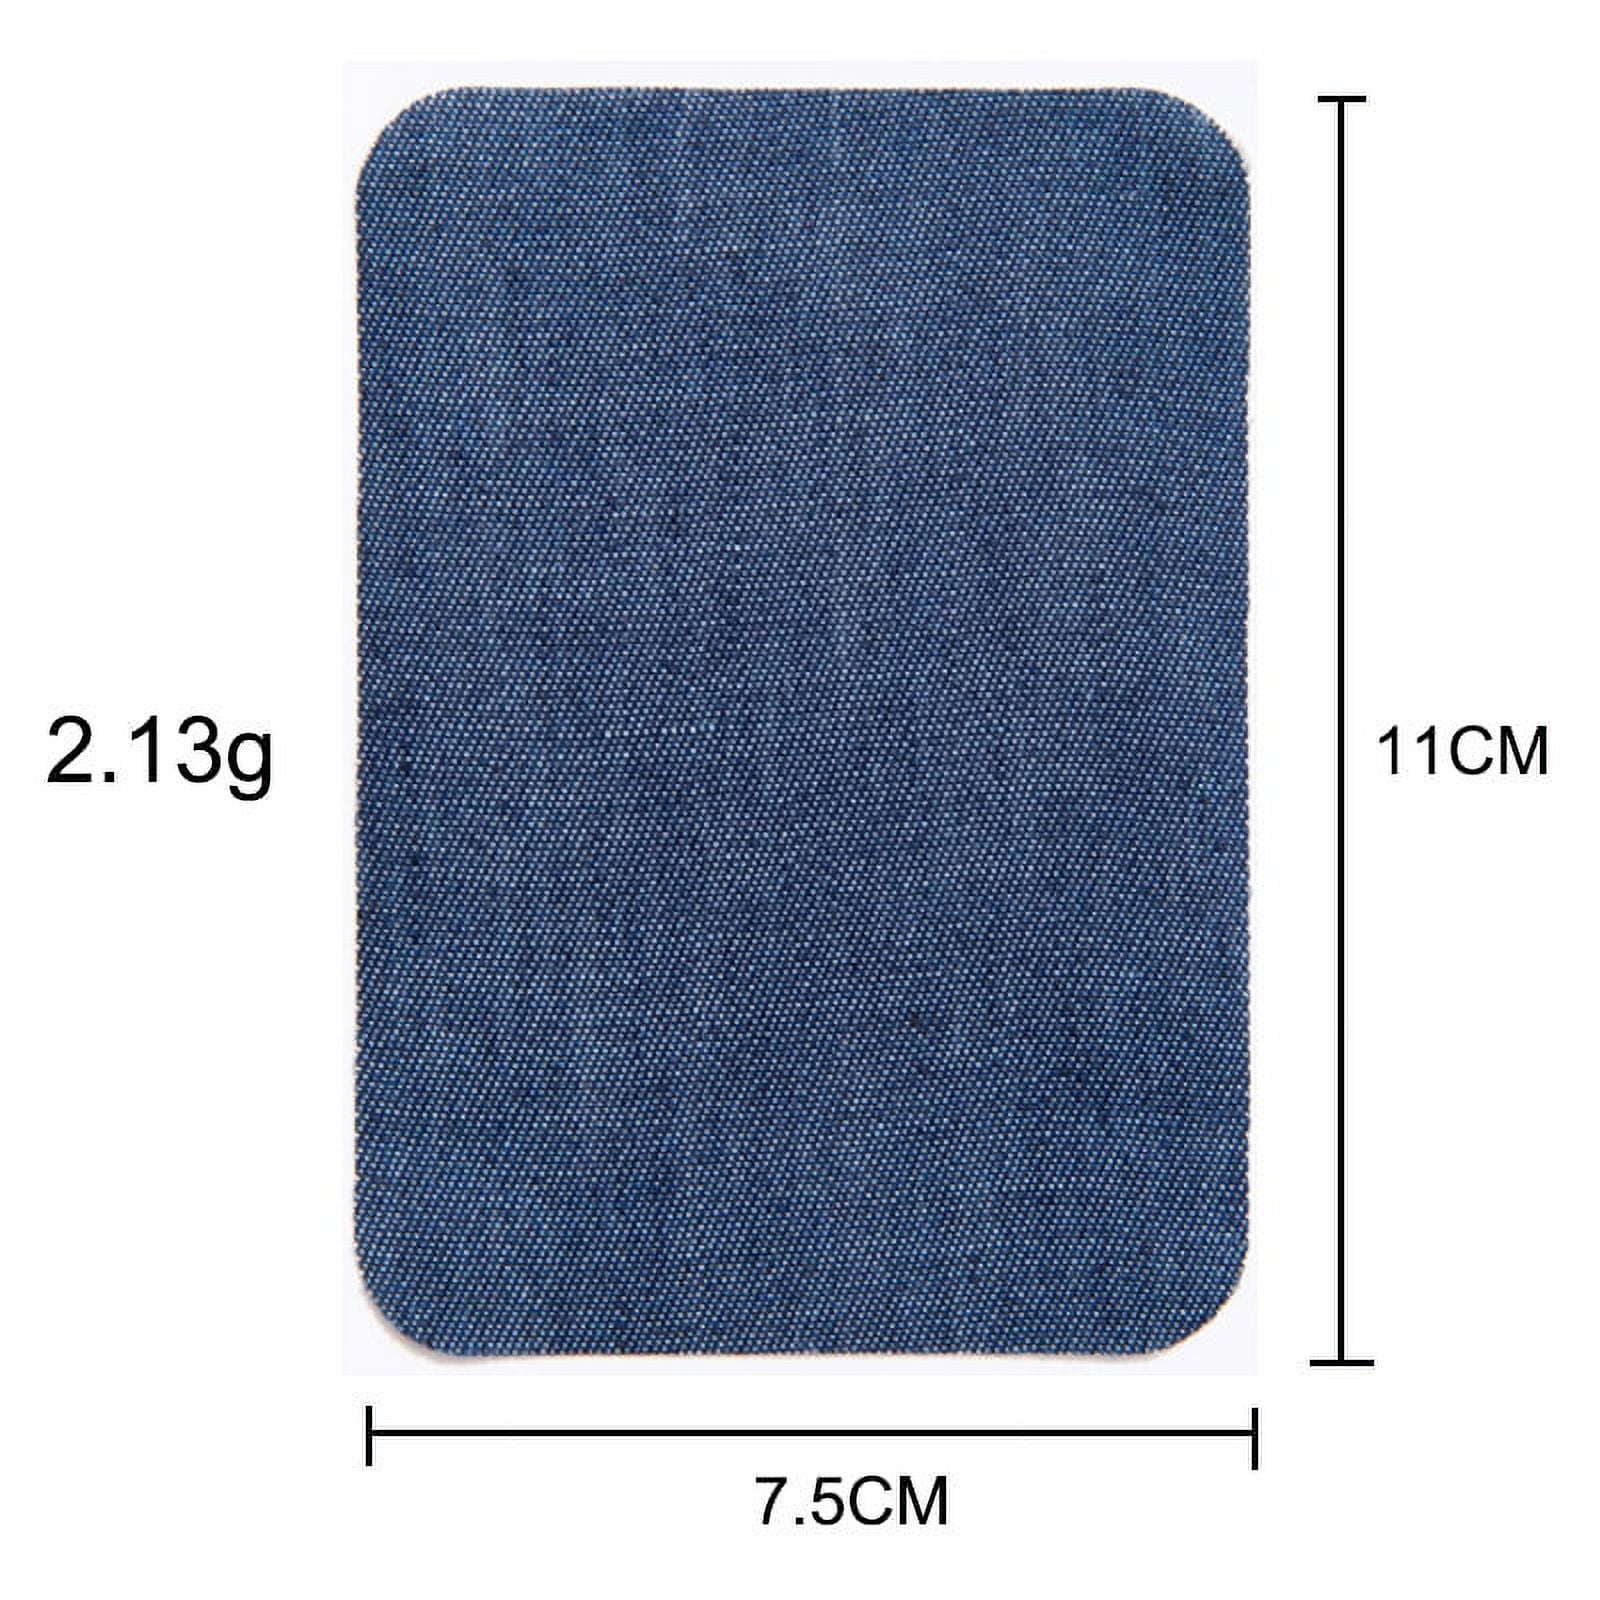 20 Pieces Quality Denim Iron-on Jean Patches Inside & Outside Strongest  Glue Cotton Assorted Shades of Blue Repair Decorating Kit